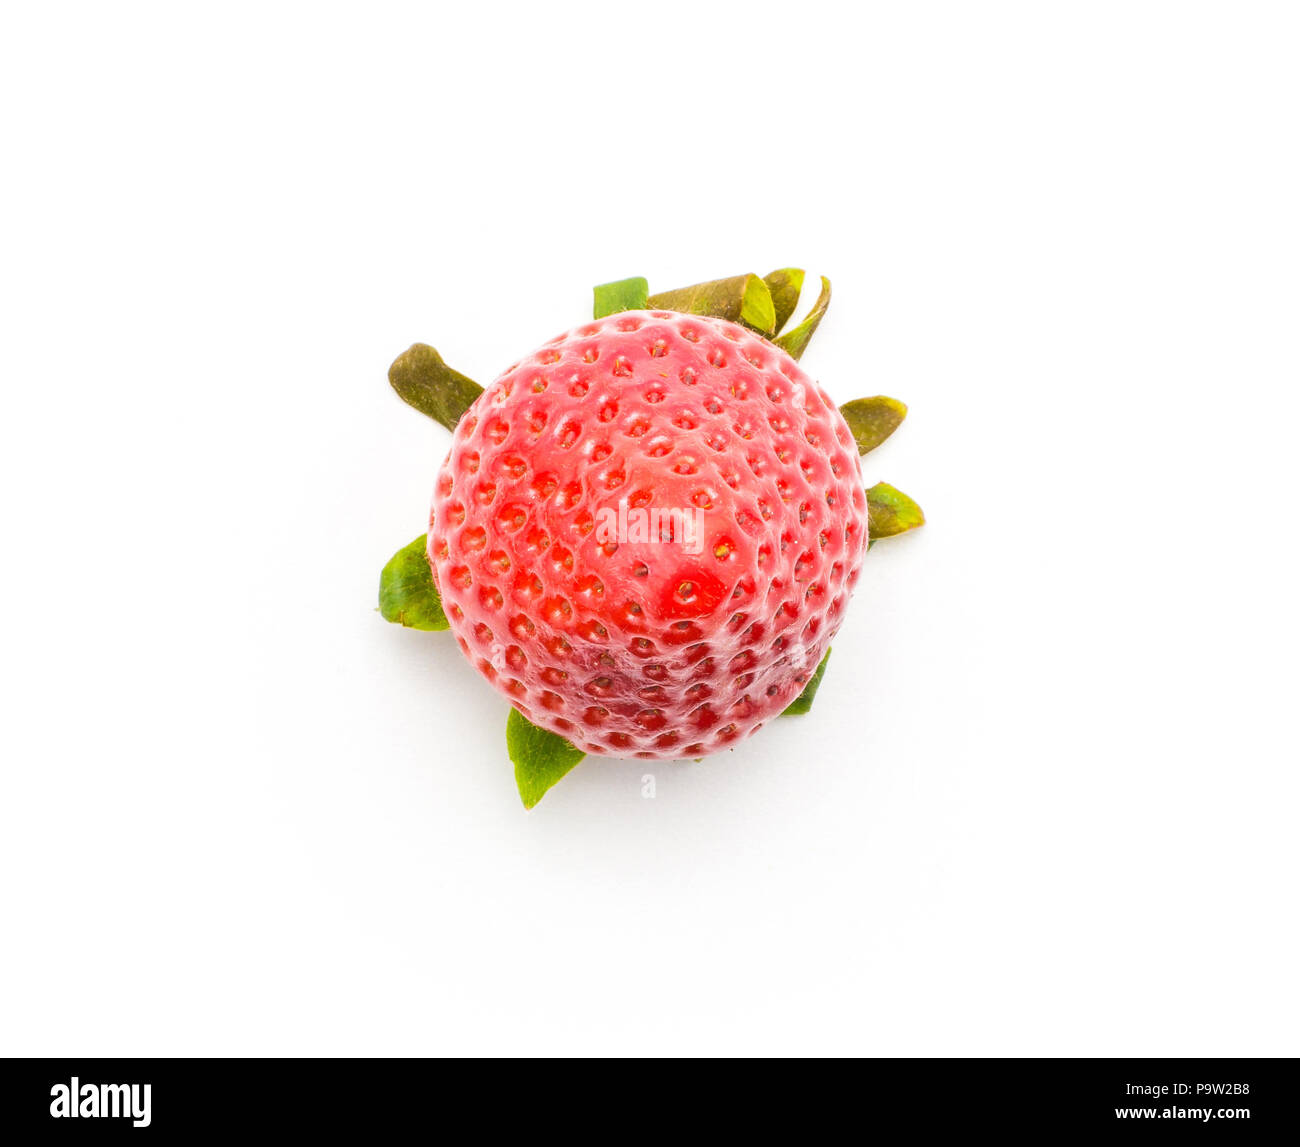 One garden strawberry top view isolated on white background Stock Photo